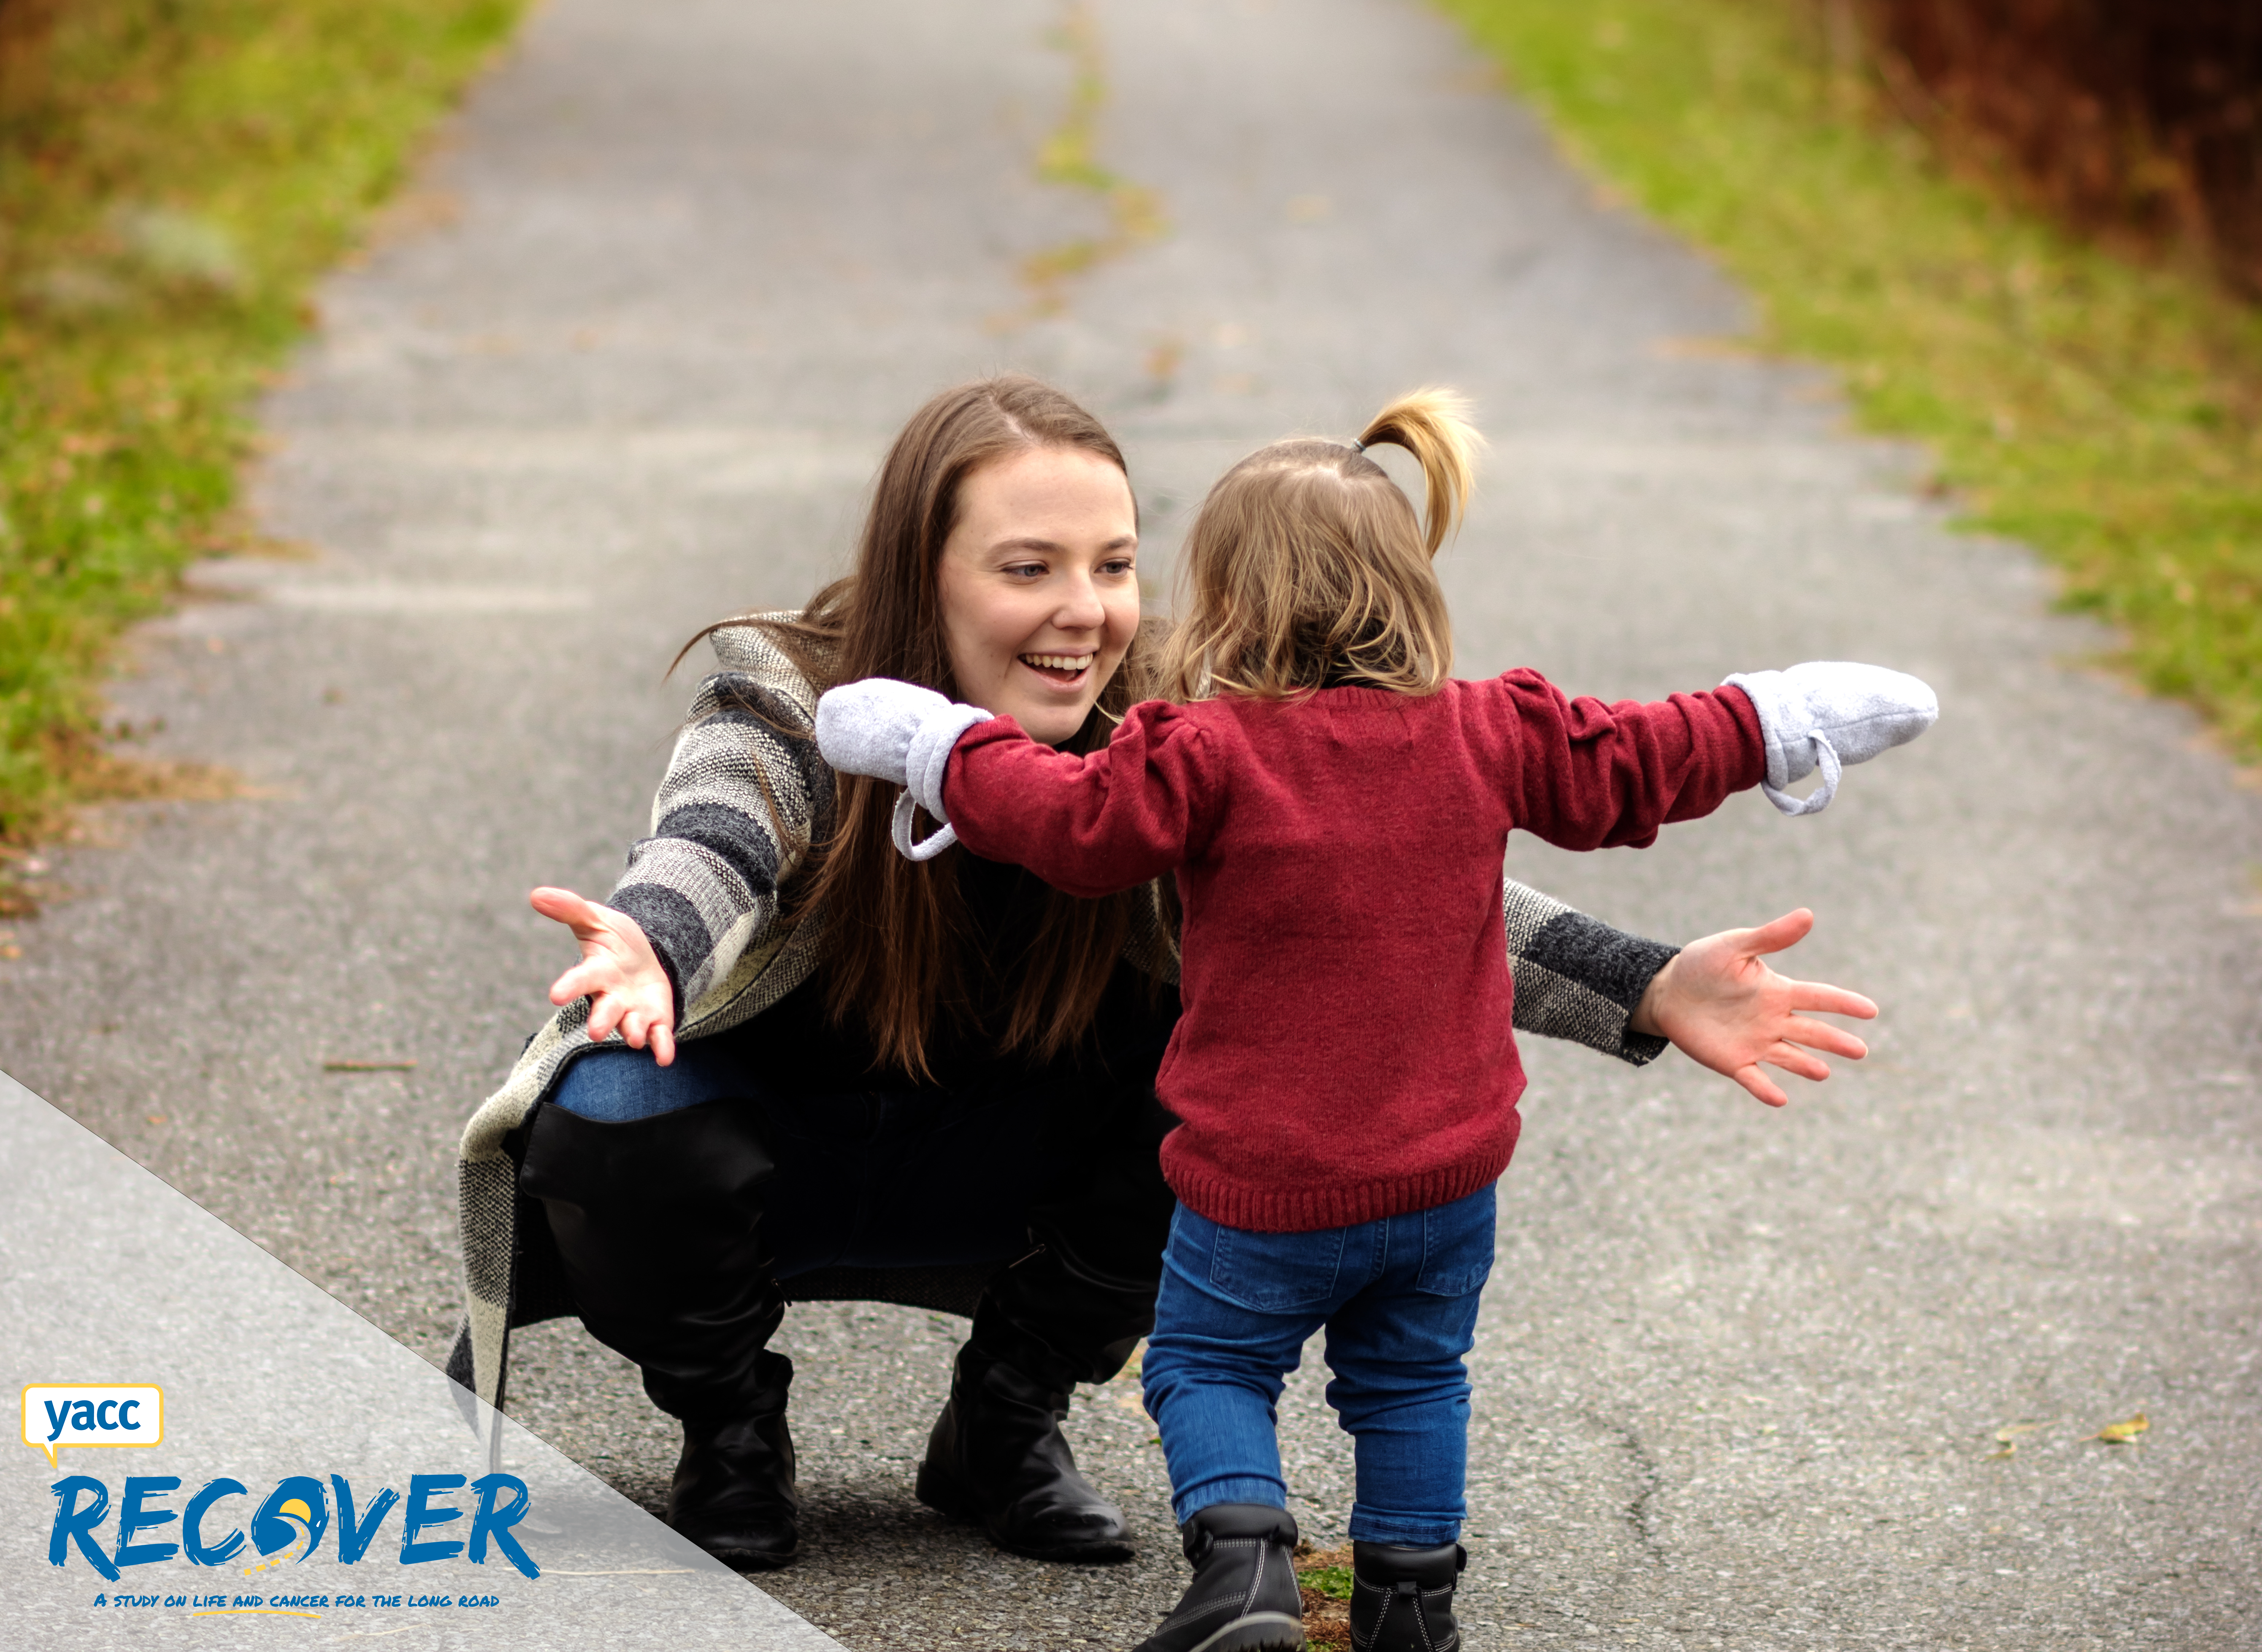 Gabrielle is crouched down with her arms outstretched toward her toddler. She has a large smile on her face. They are on a path outdoors. 